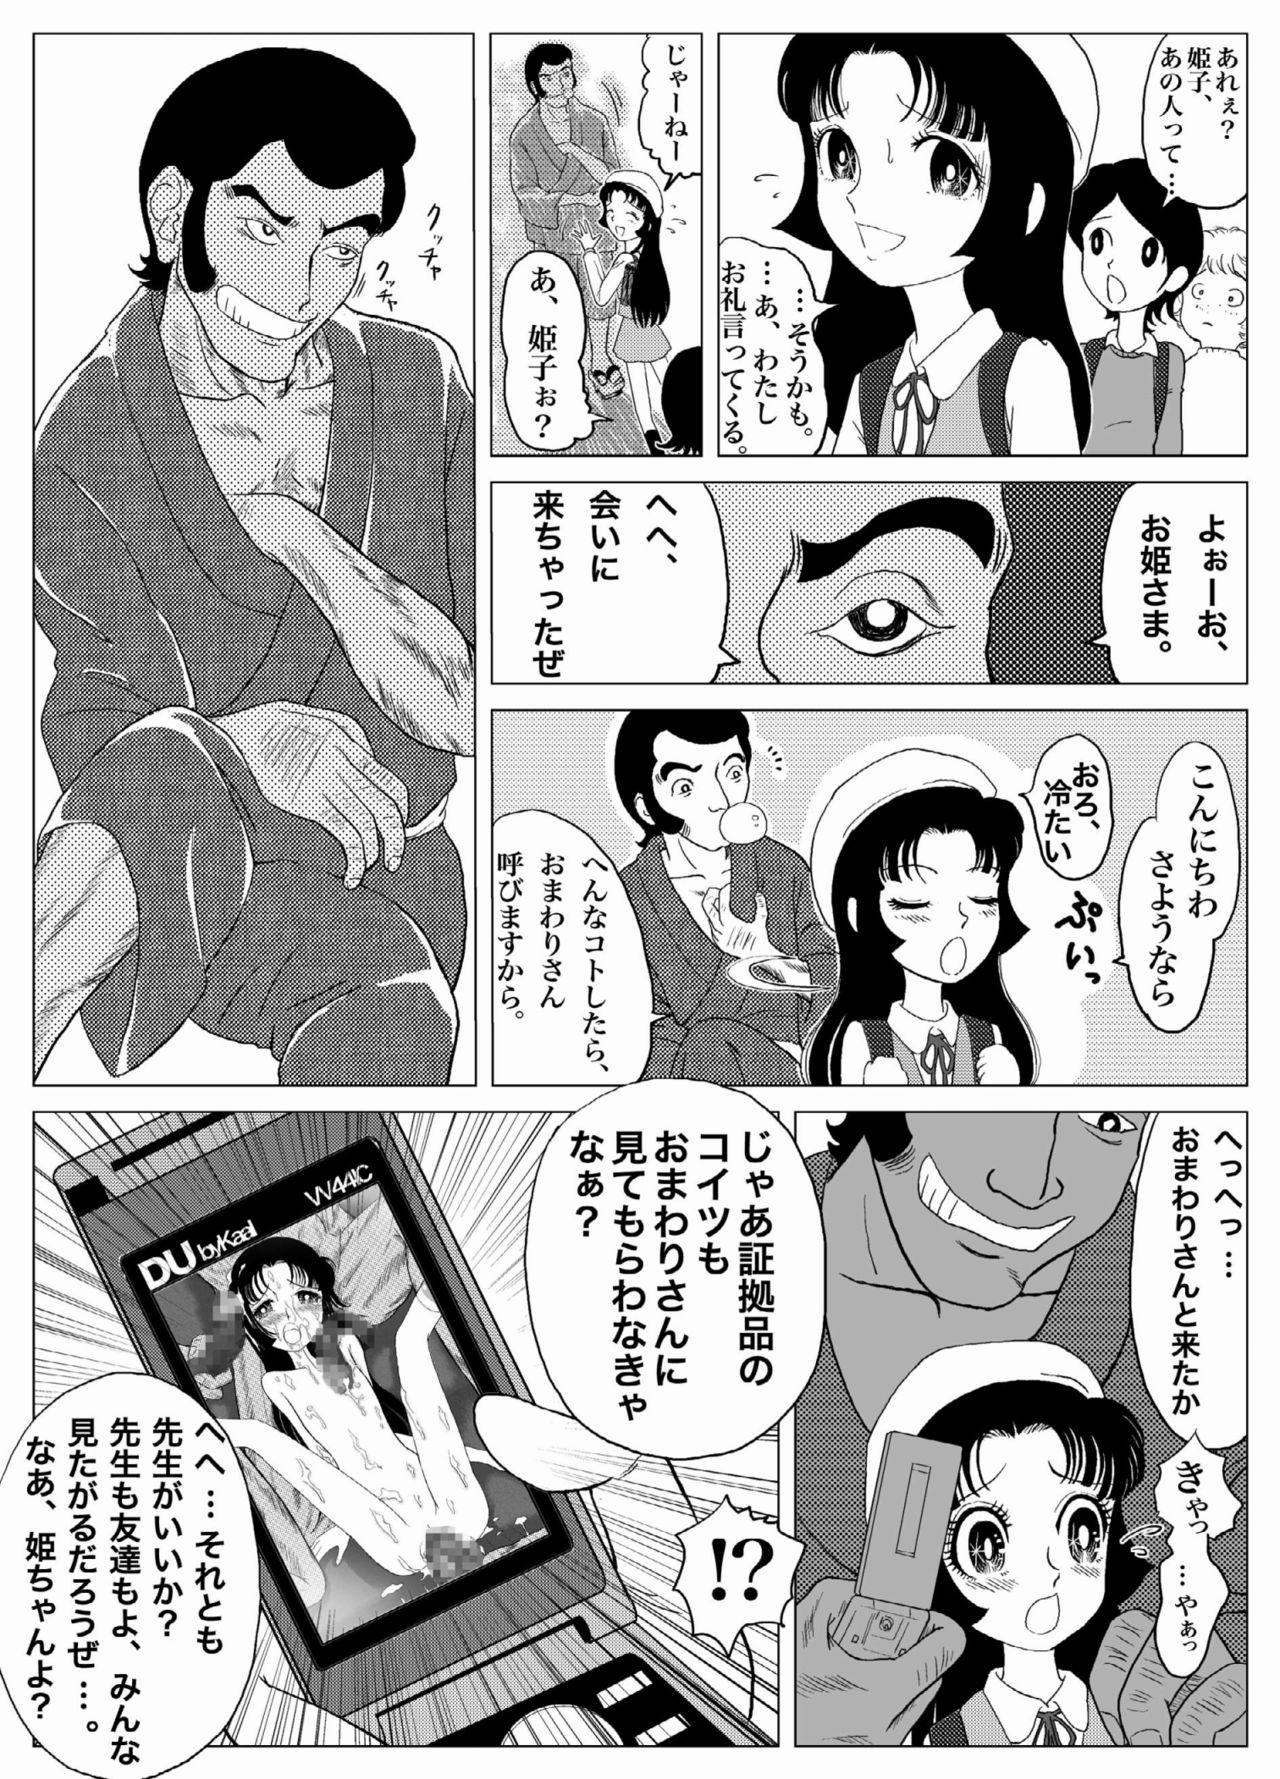 Soapy Uwasa no Goreijo - HIMEKO Still in the WRONG World Mask - Page 3